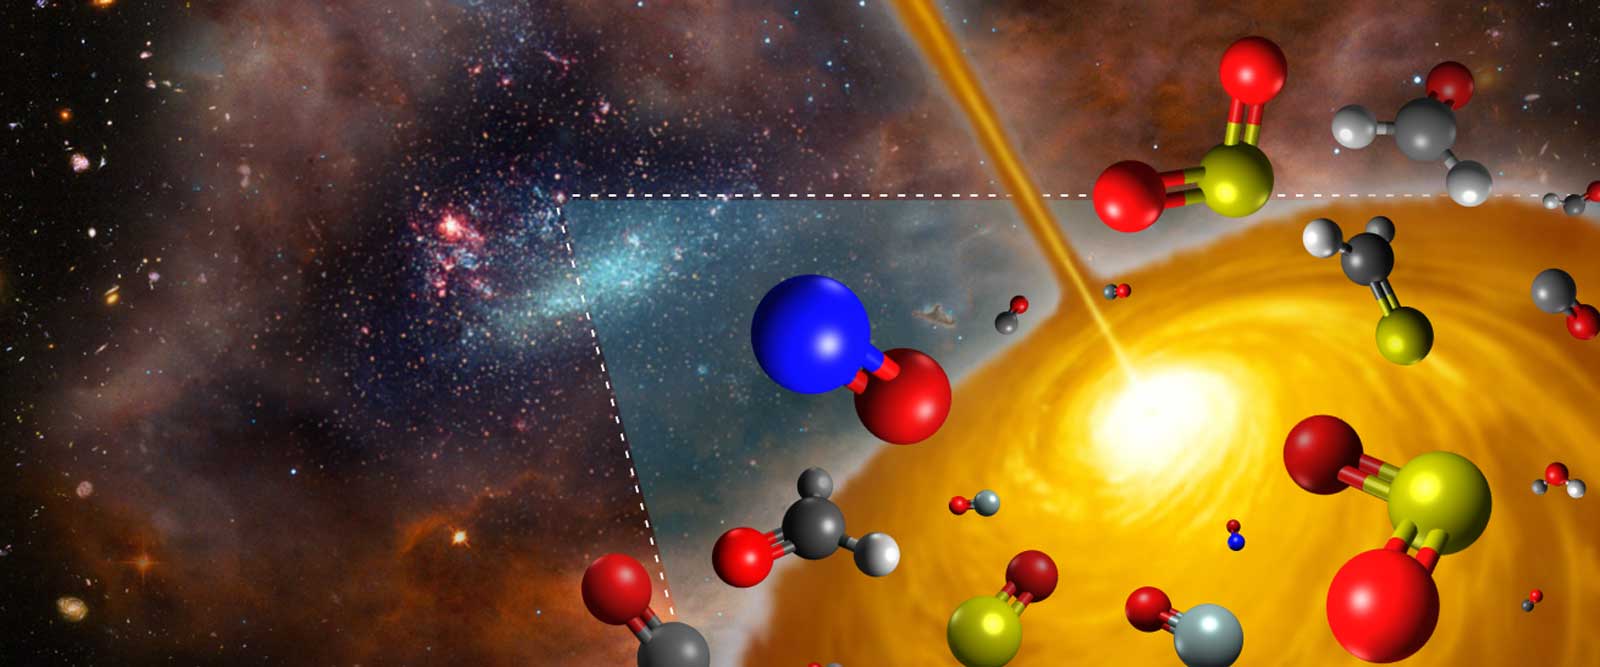 Stellar cocoon doesn’t contain ingredients for recipe of life 